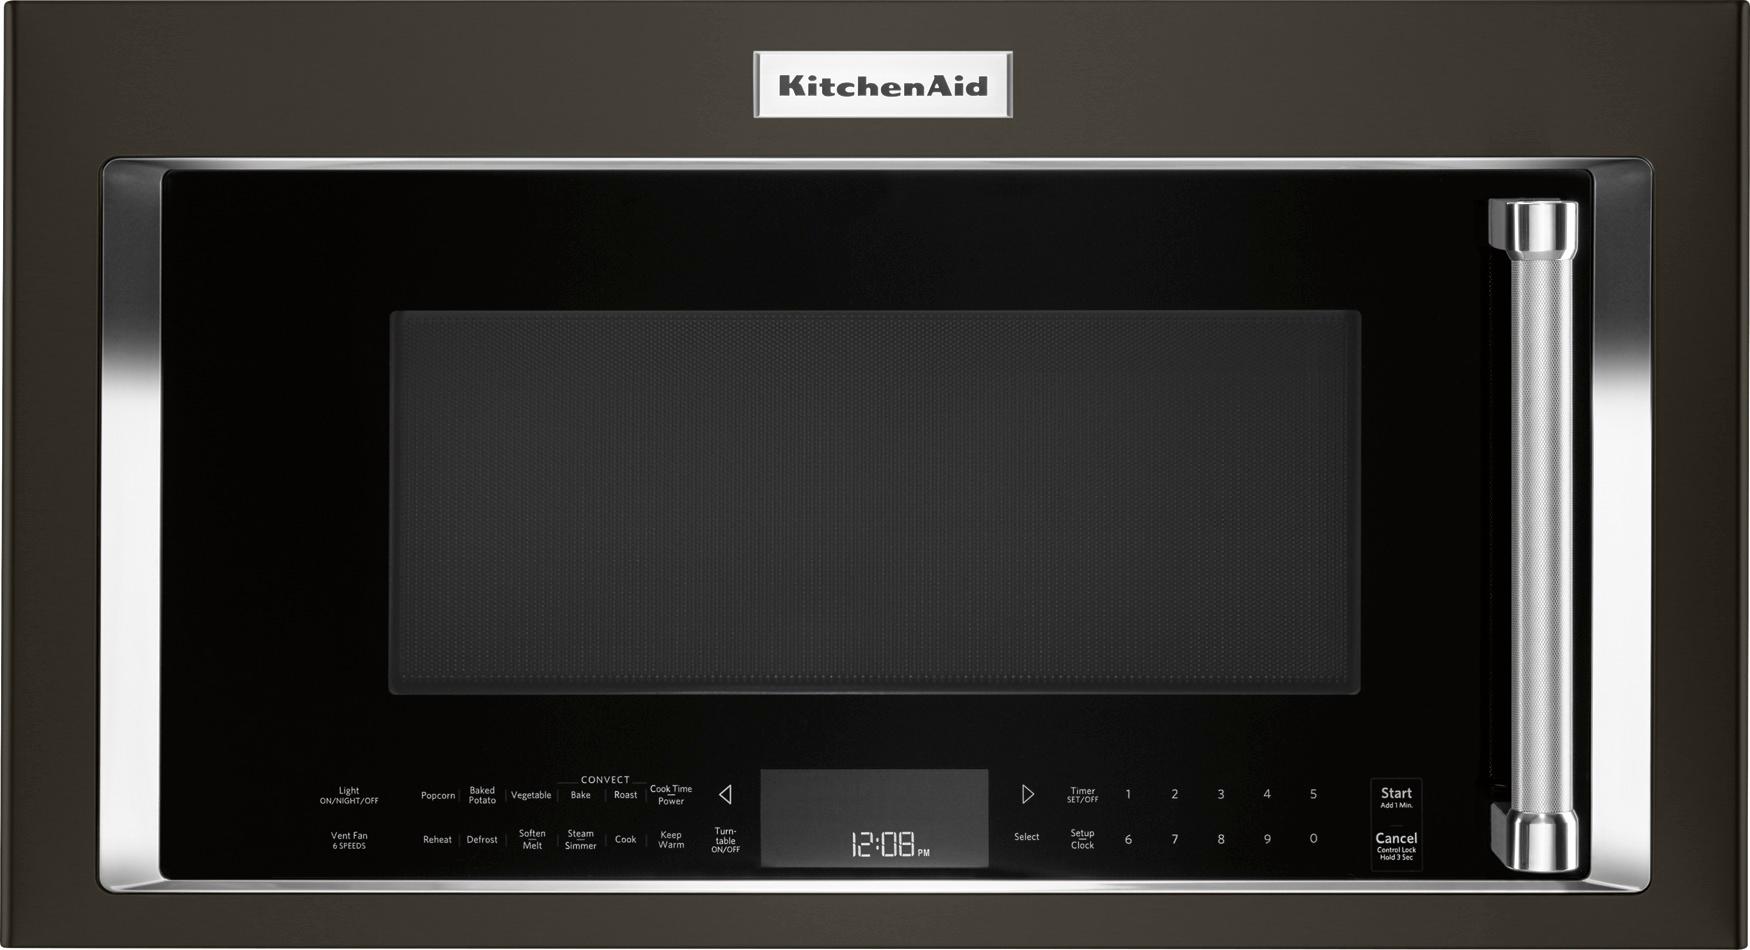 KitchenAid - 1.9 Cu. Ft. Convection Over-the-Range Microwave - Black Kitchenaid Over The Range Microwave Black Stainless Steel